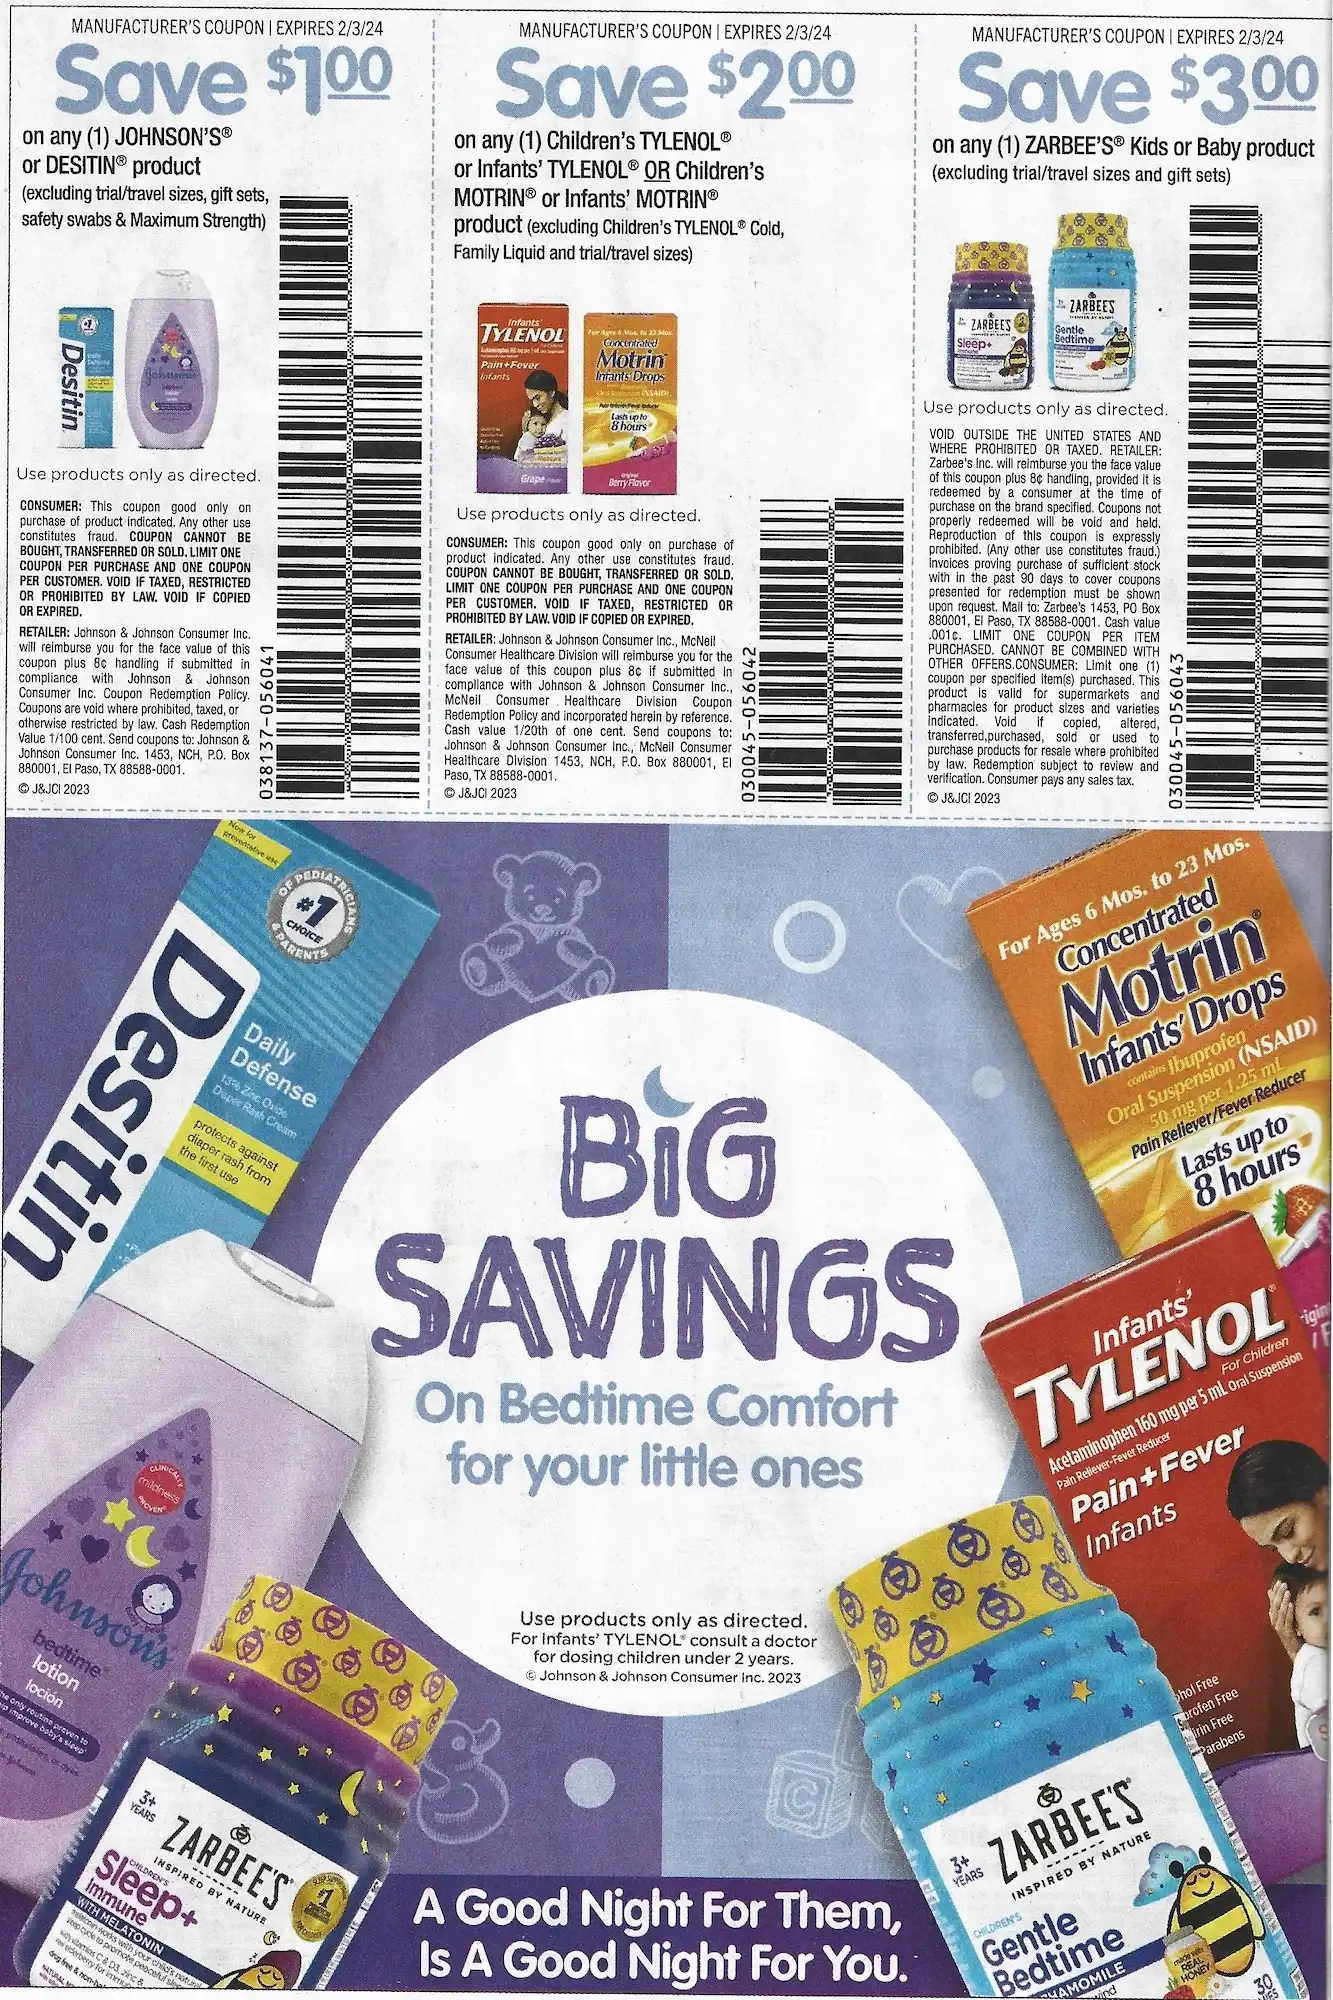 Save.Com Weekly Mailer Coupons - 01/07/2024 Destin Tylenol Motrin Zarbees